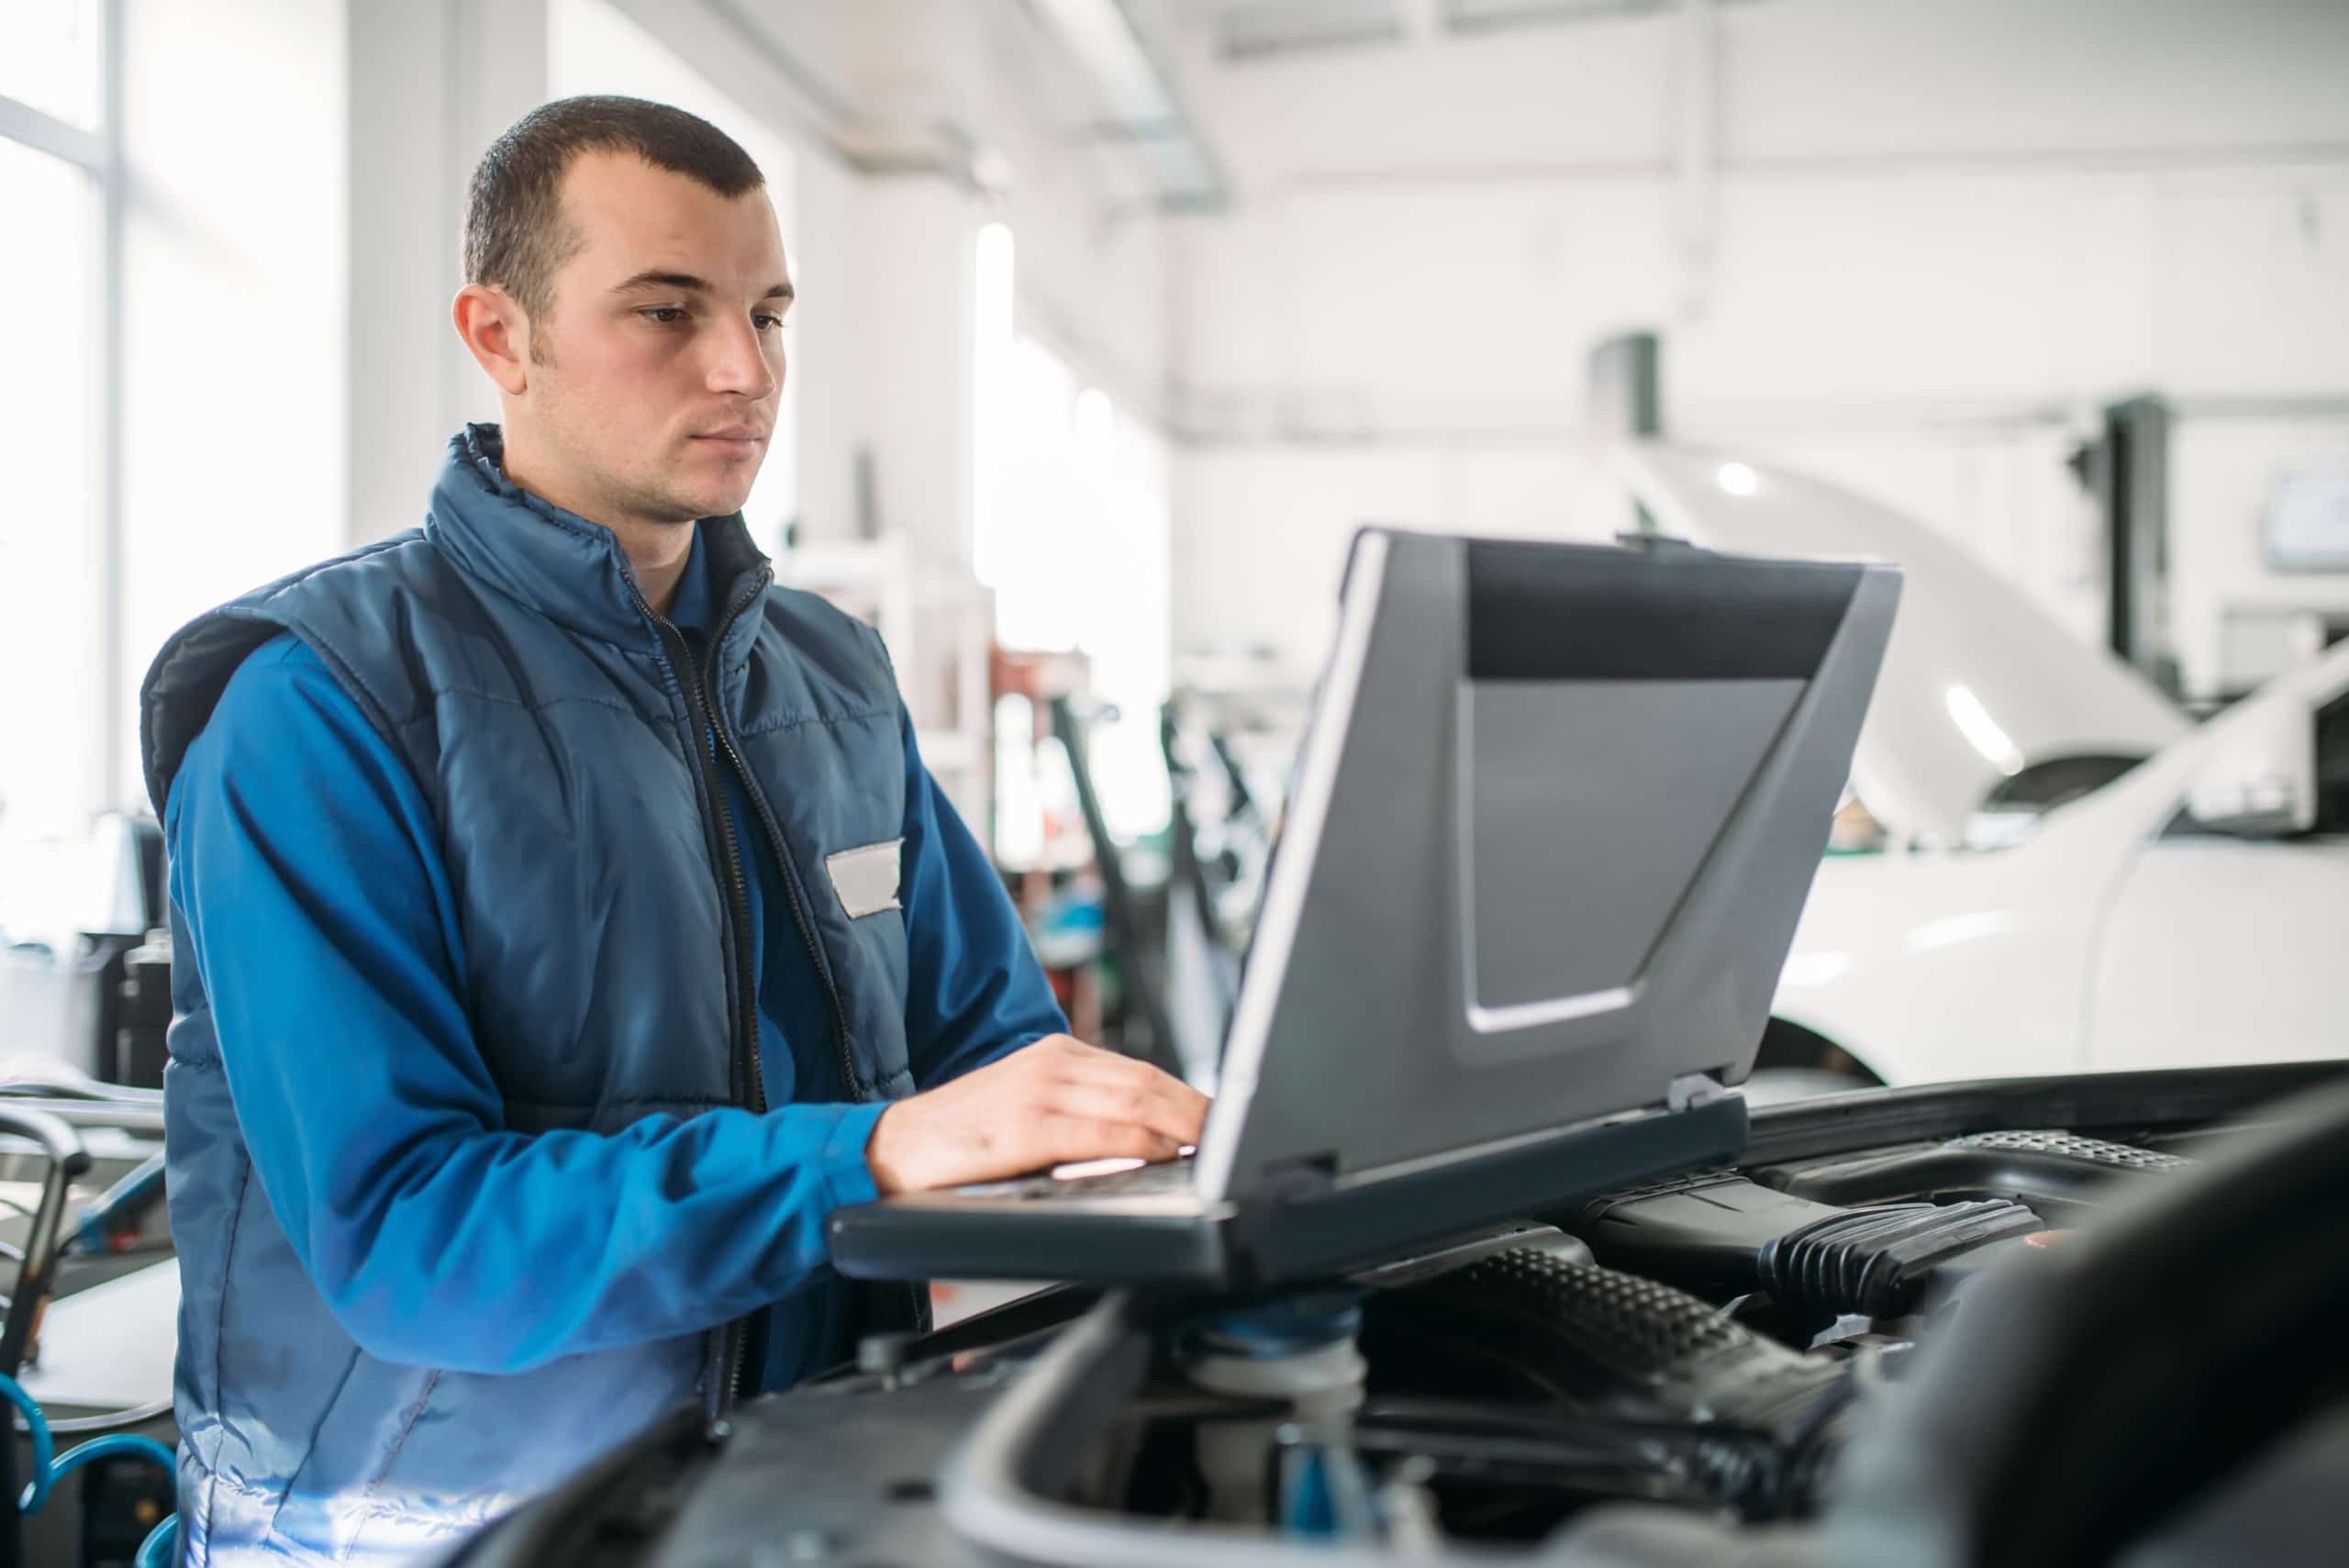 Man at auto dealership on a laptop on top of a car engine